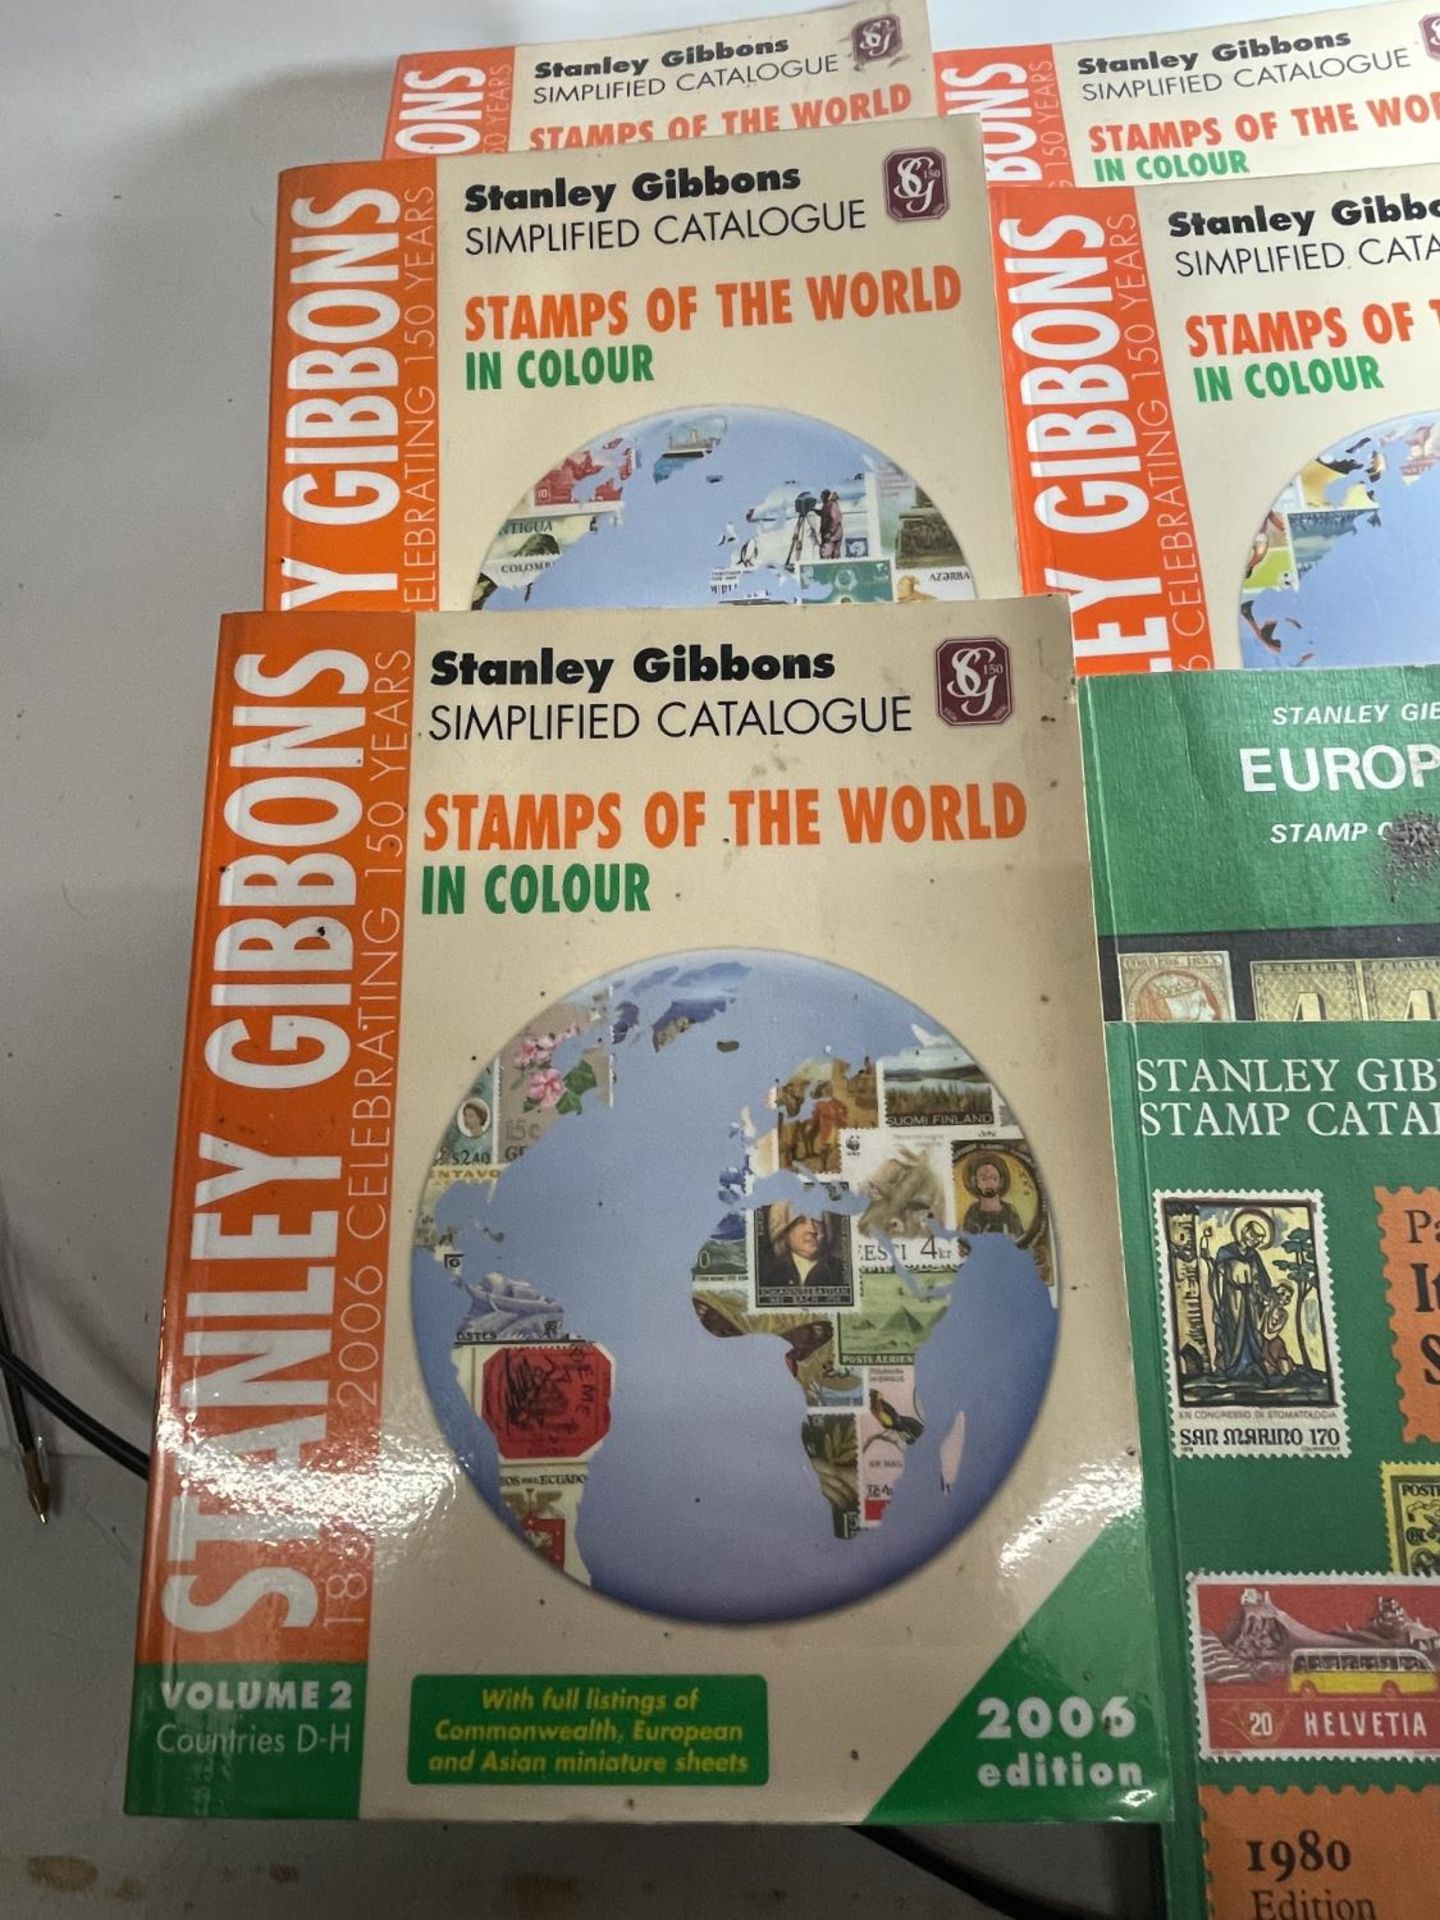 VOLUMES 1 - 5 OF THE 2006 EDITION OF STANLEY GIBBONS STAMP DIRECTORIES PLUS FOUR OTHER STAMP BOOKS - Bild 2 aus 5